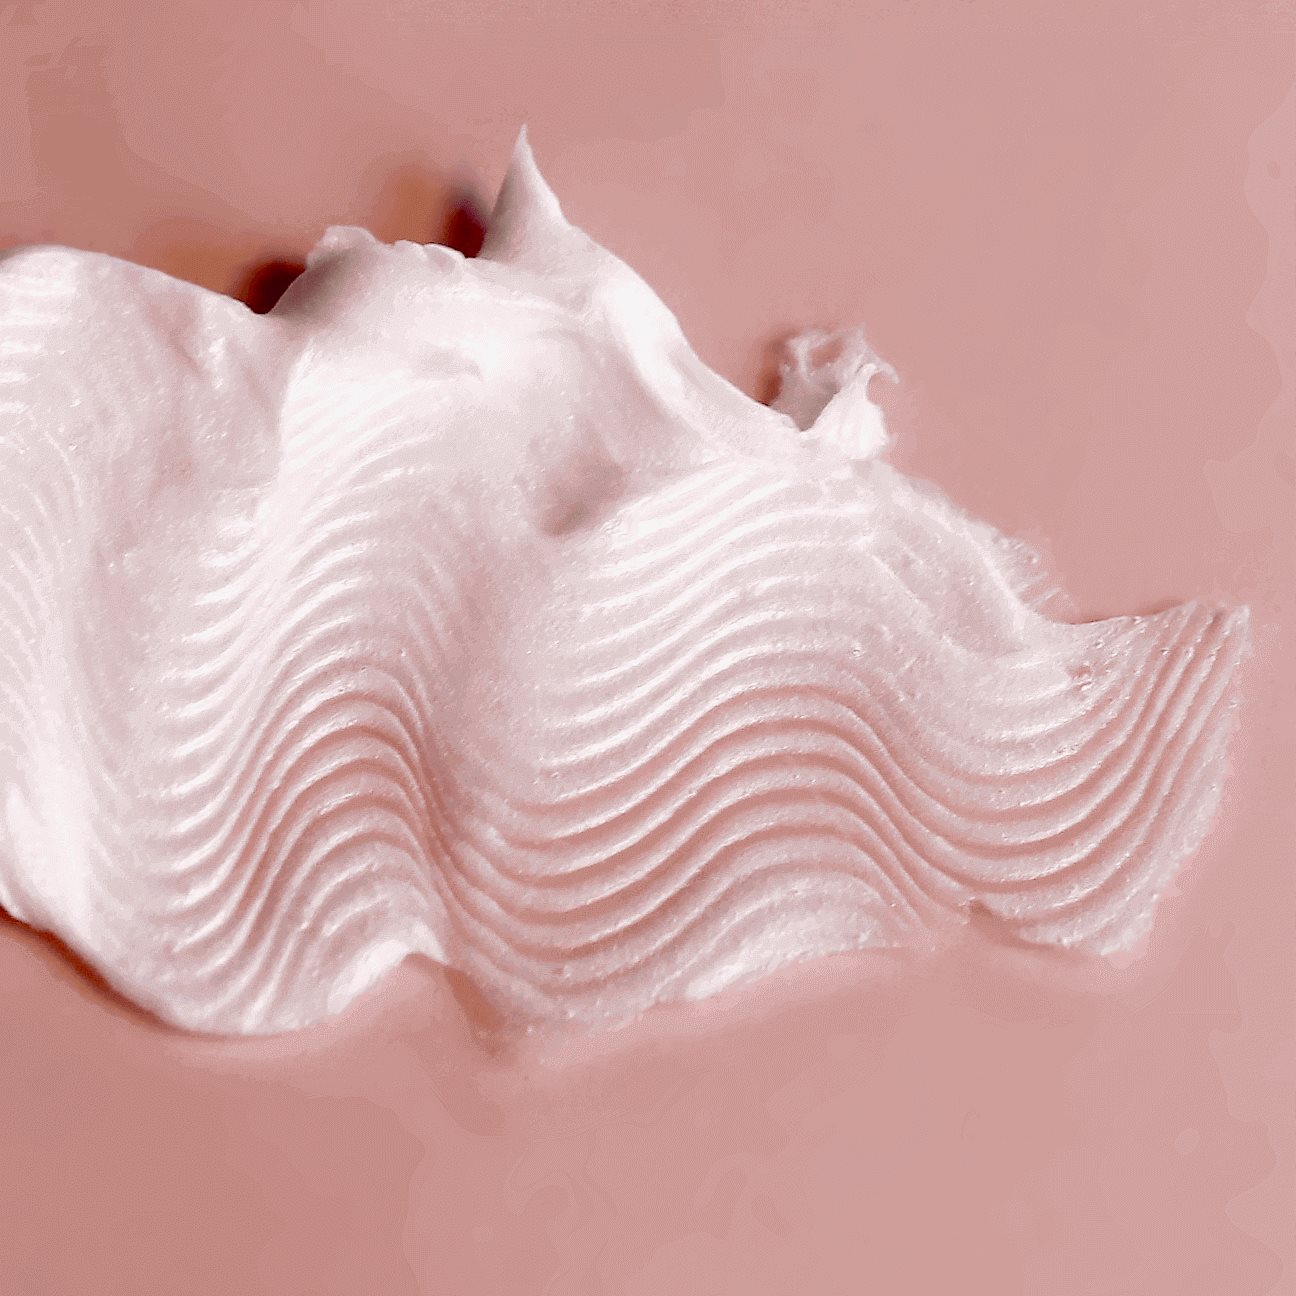 DAILY FOAM CLEANSER's thumbnail image